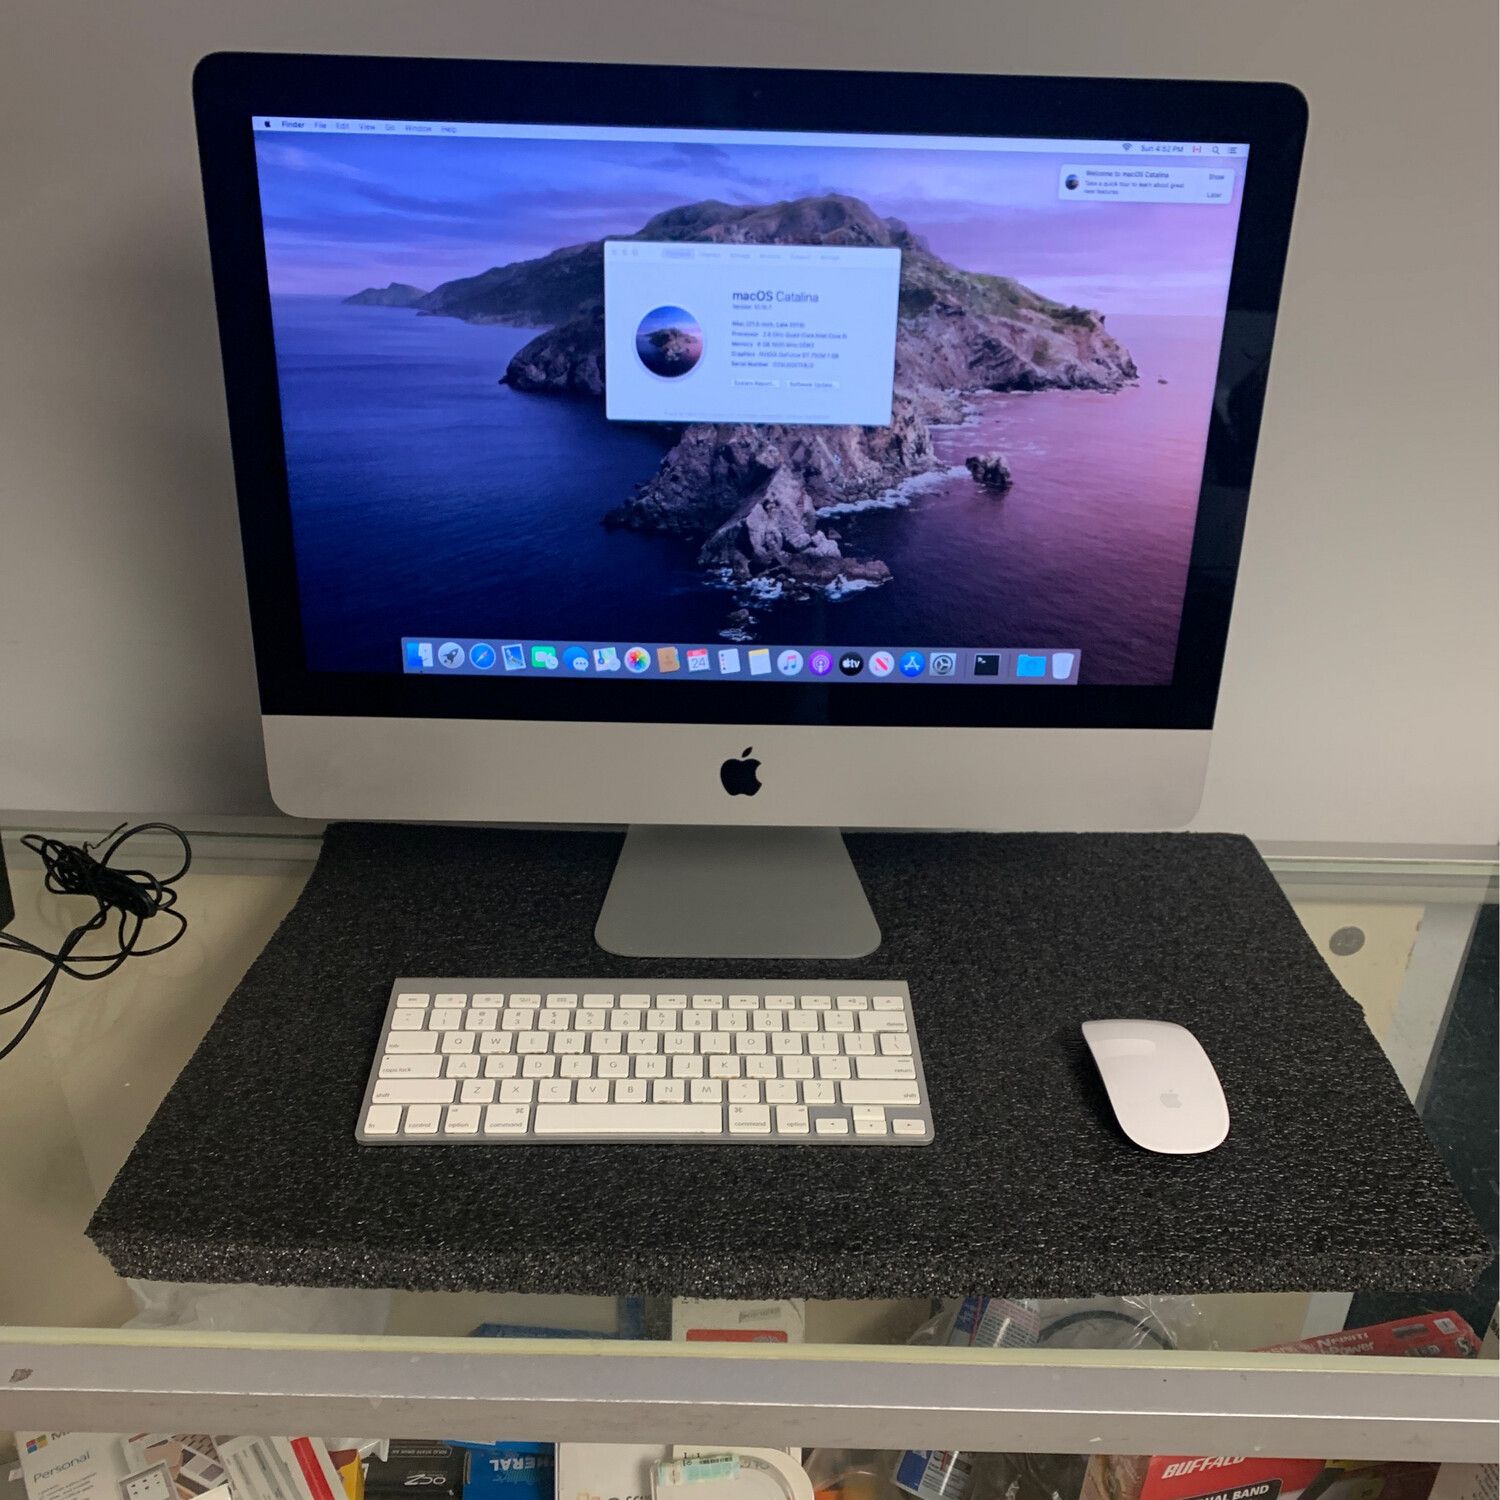 iMac Late 2013 21.5” Core I5 Quad Core 1 TB 8 GB MacOS 10.15.7 Catalina/ BT Keyboard and mouse